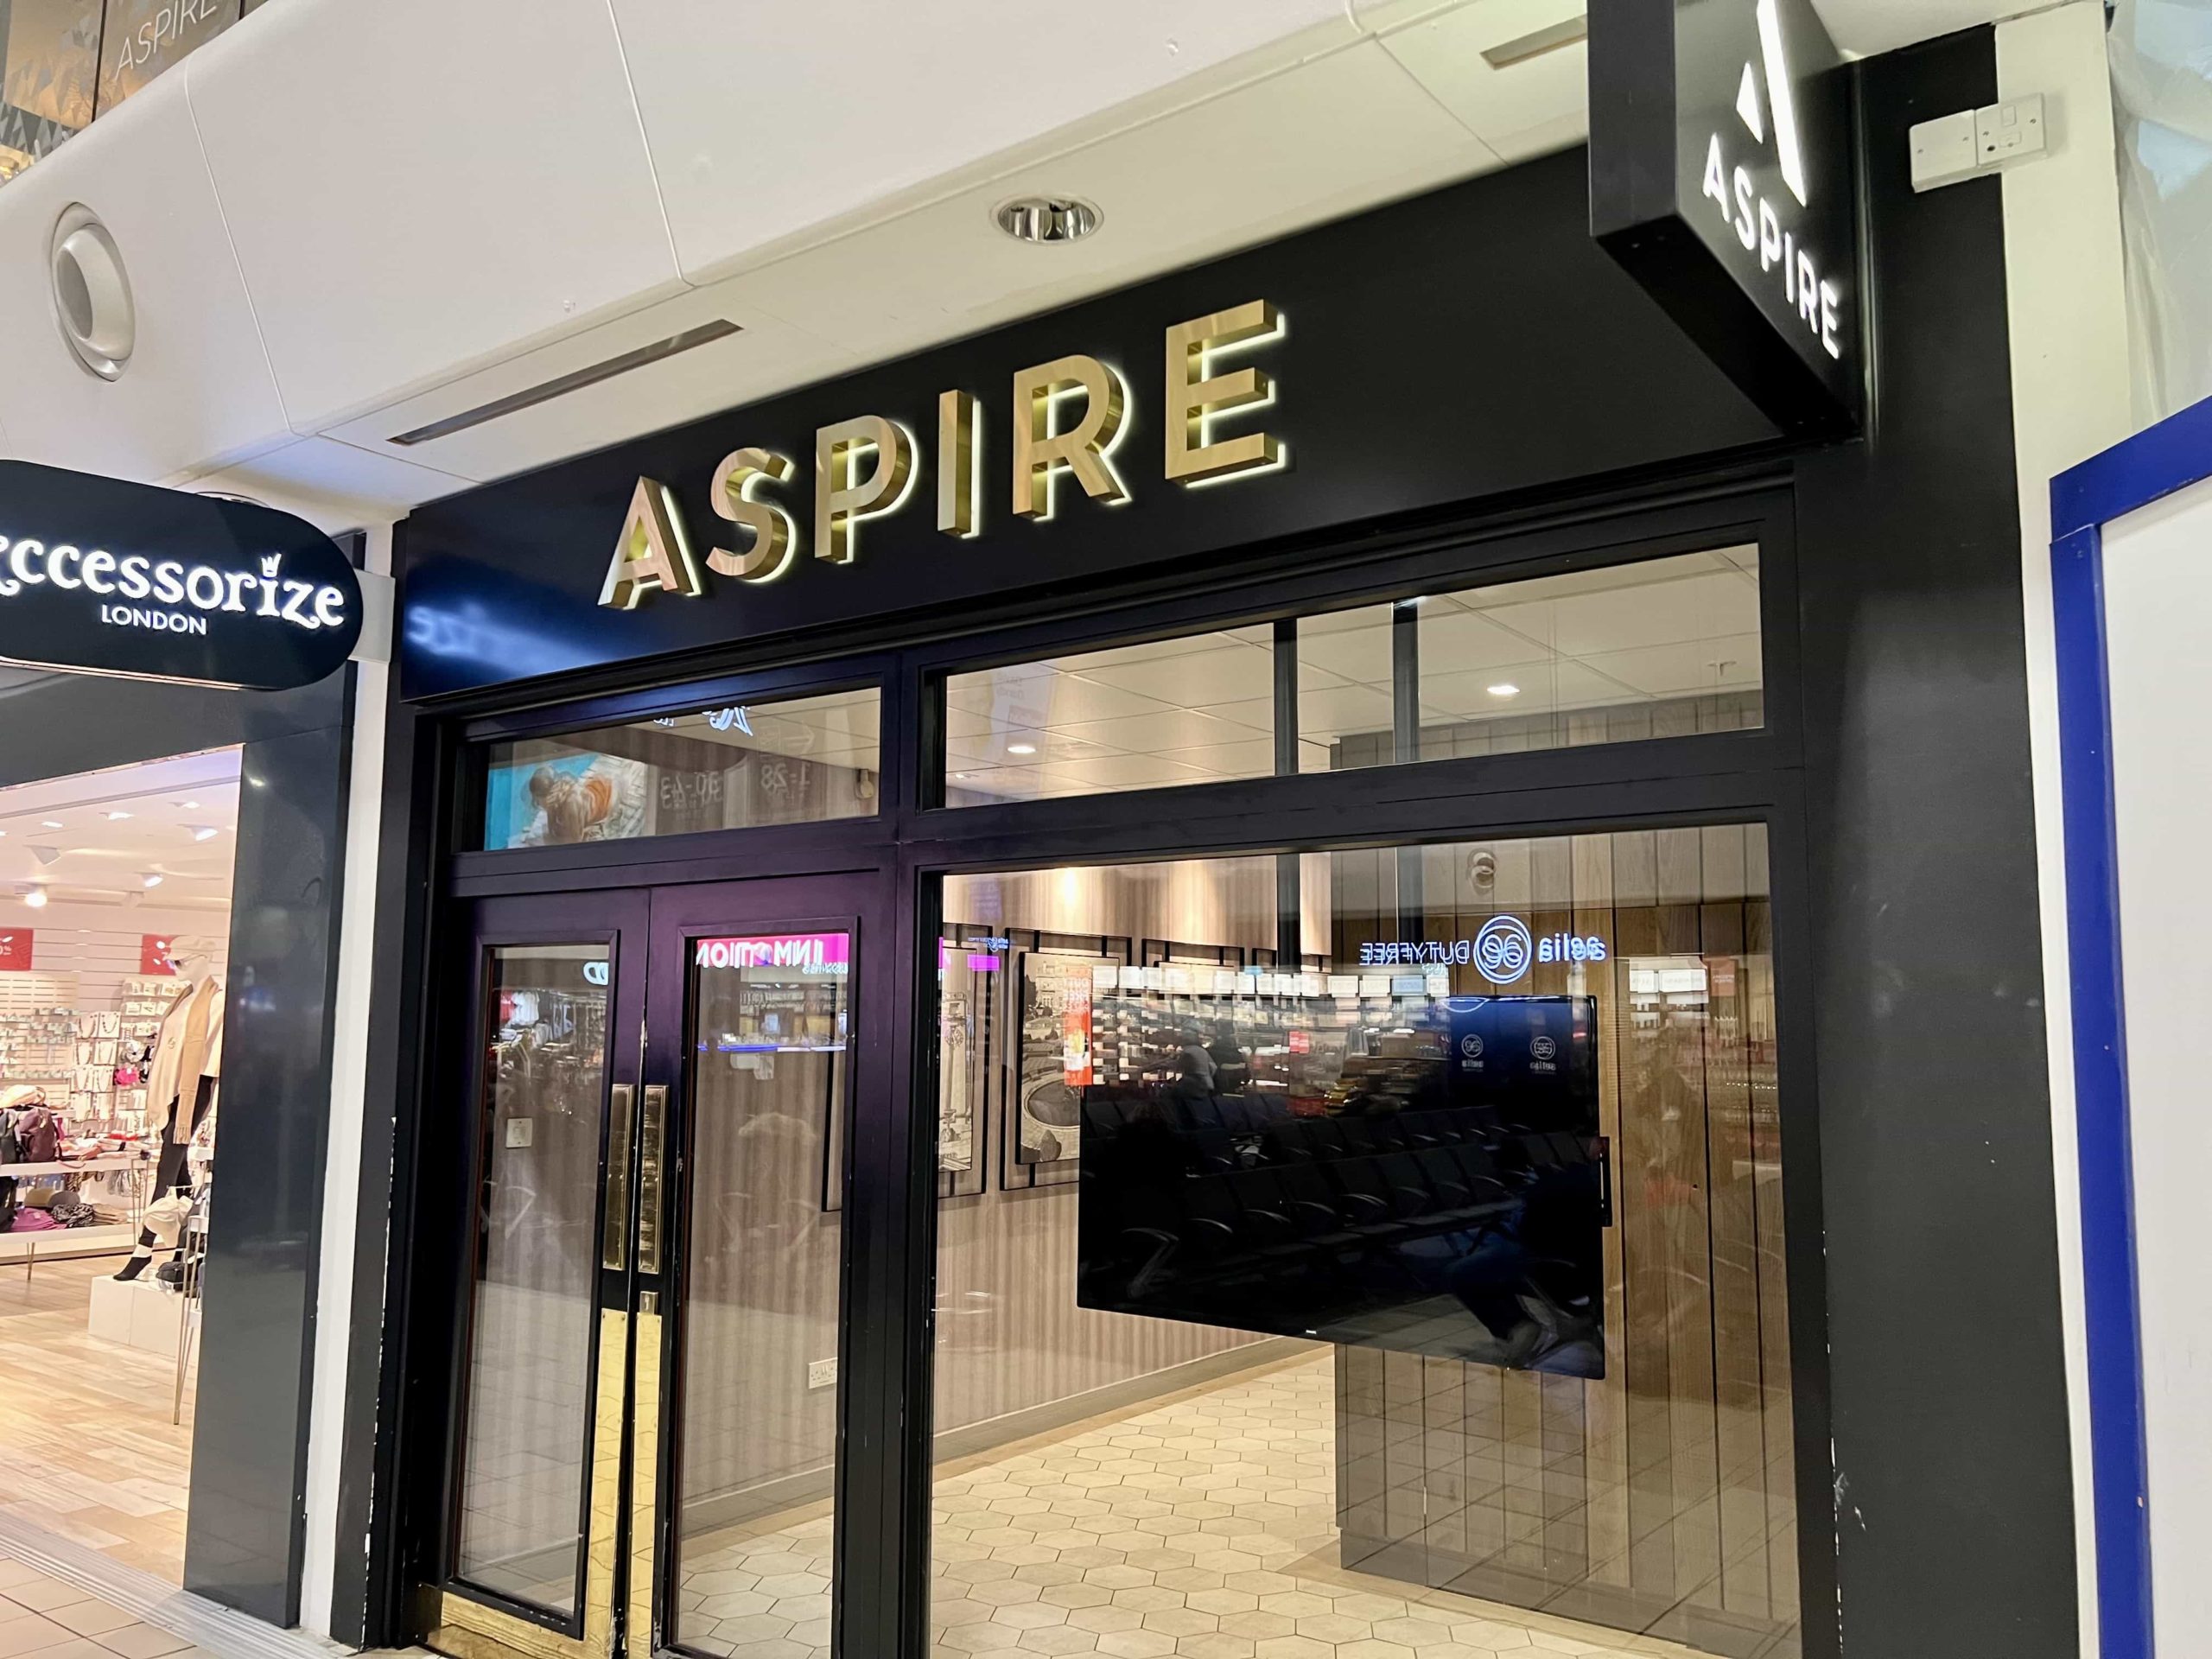 The entrance to Aspire Lounge at Luton Airport